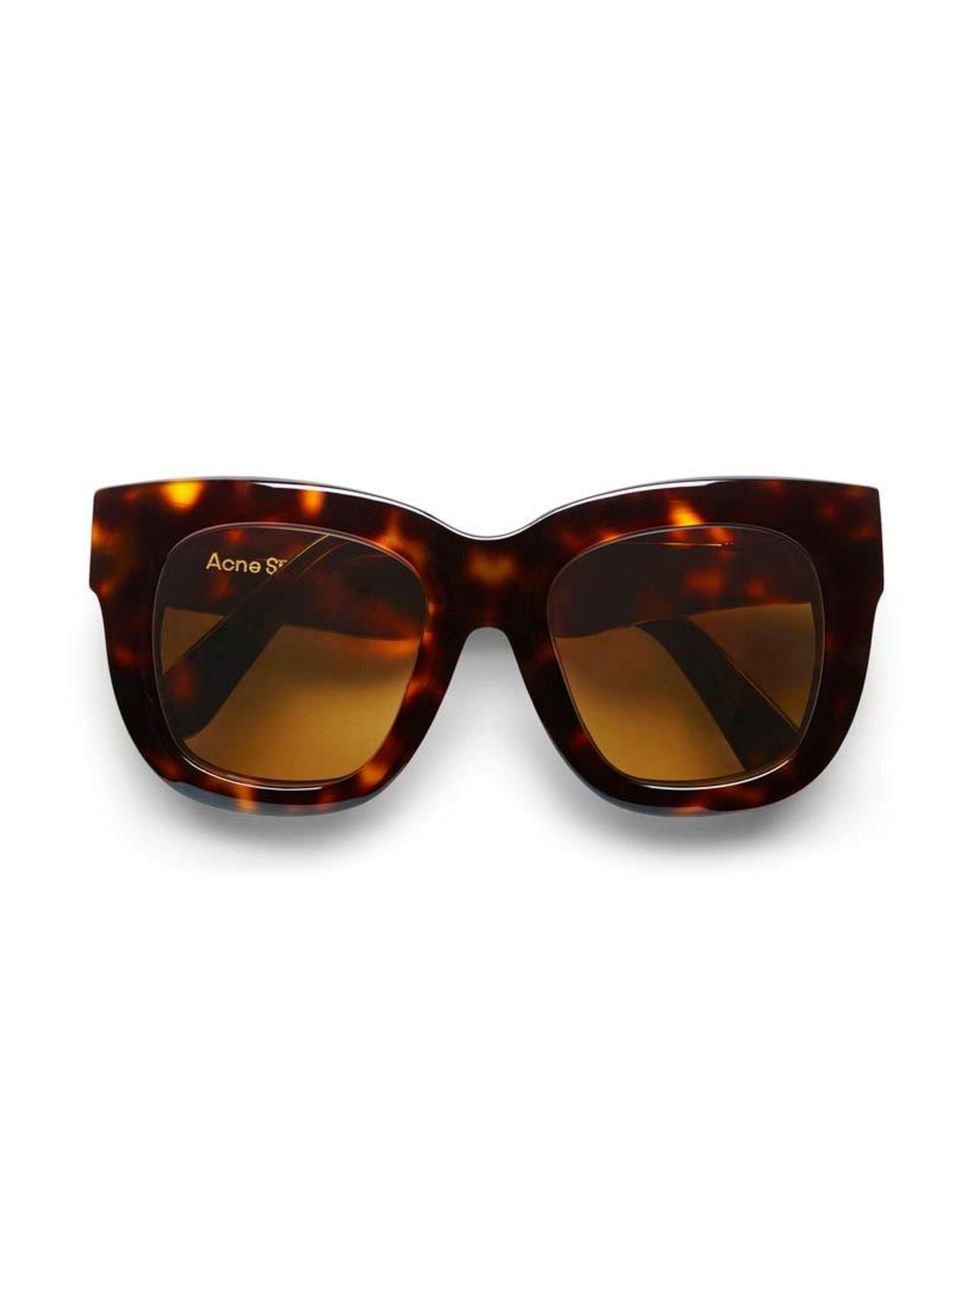 <p>An investment pair of sunnies will give your Spring wardrobe an edge. Try Acne's super-cool debut shades.</p>

<p><a href="http://www.acnestudios.com/library-tortoise-light-brown.html#product-image-zoom-0" target="_blank">Acne</a> sunglasses, £240</p>